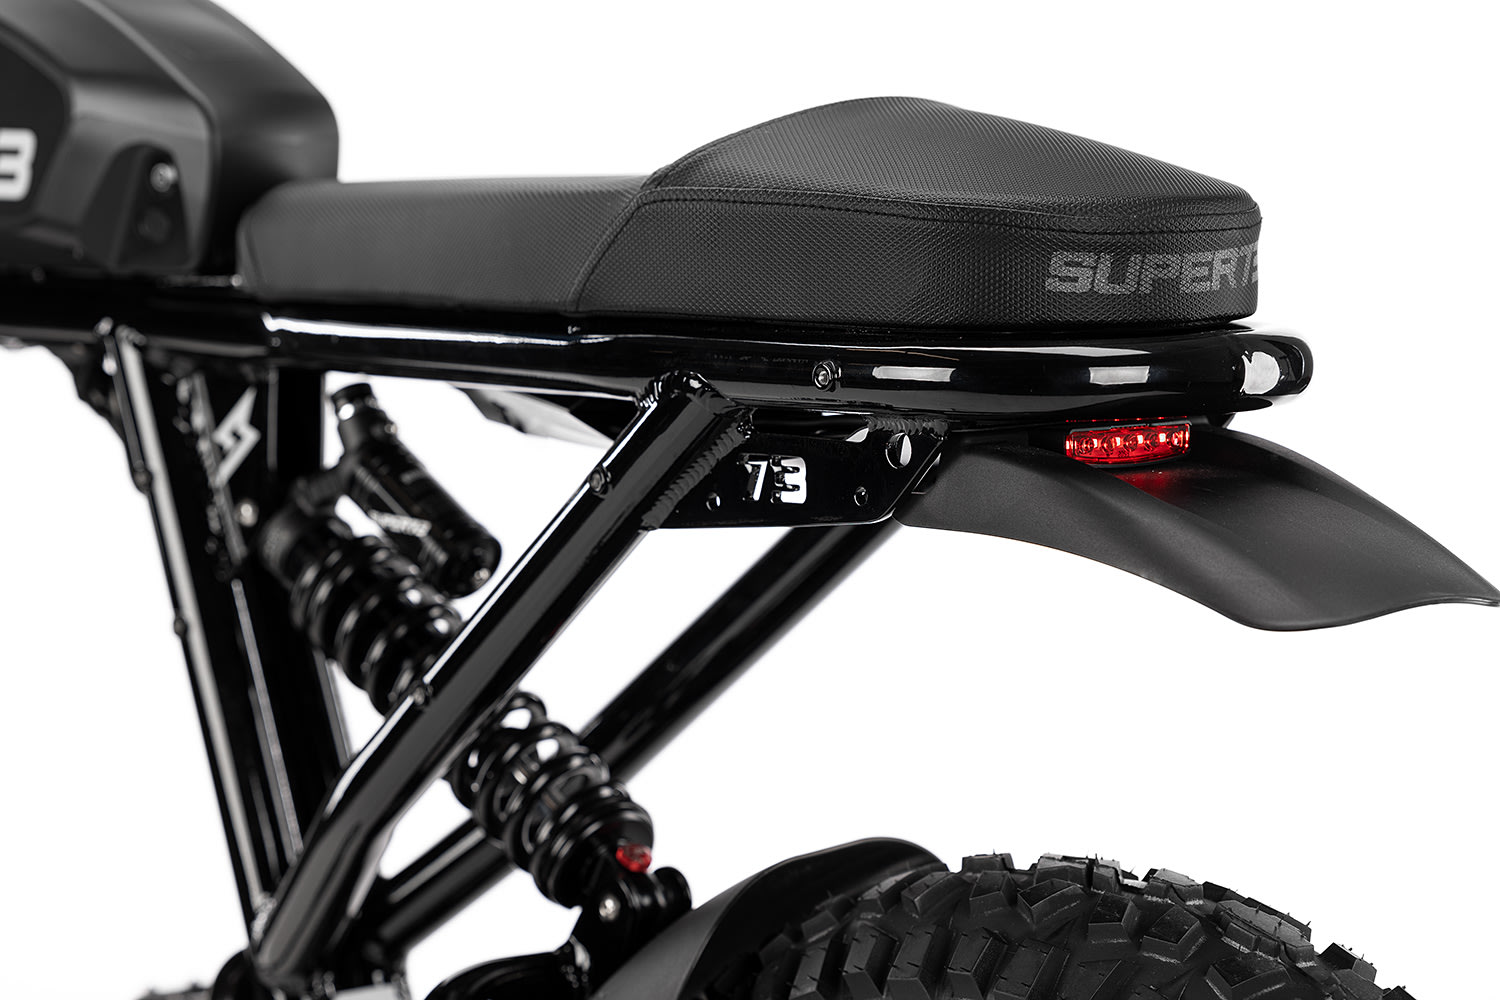 Closeup of the Super73-RX Mojave in Obsidian black seat